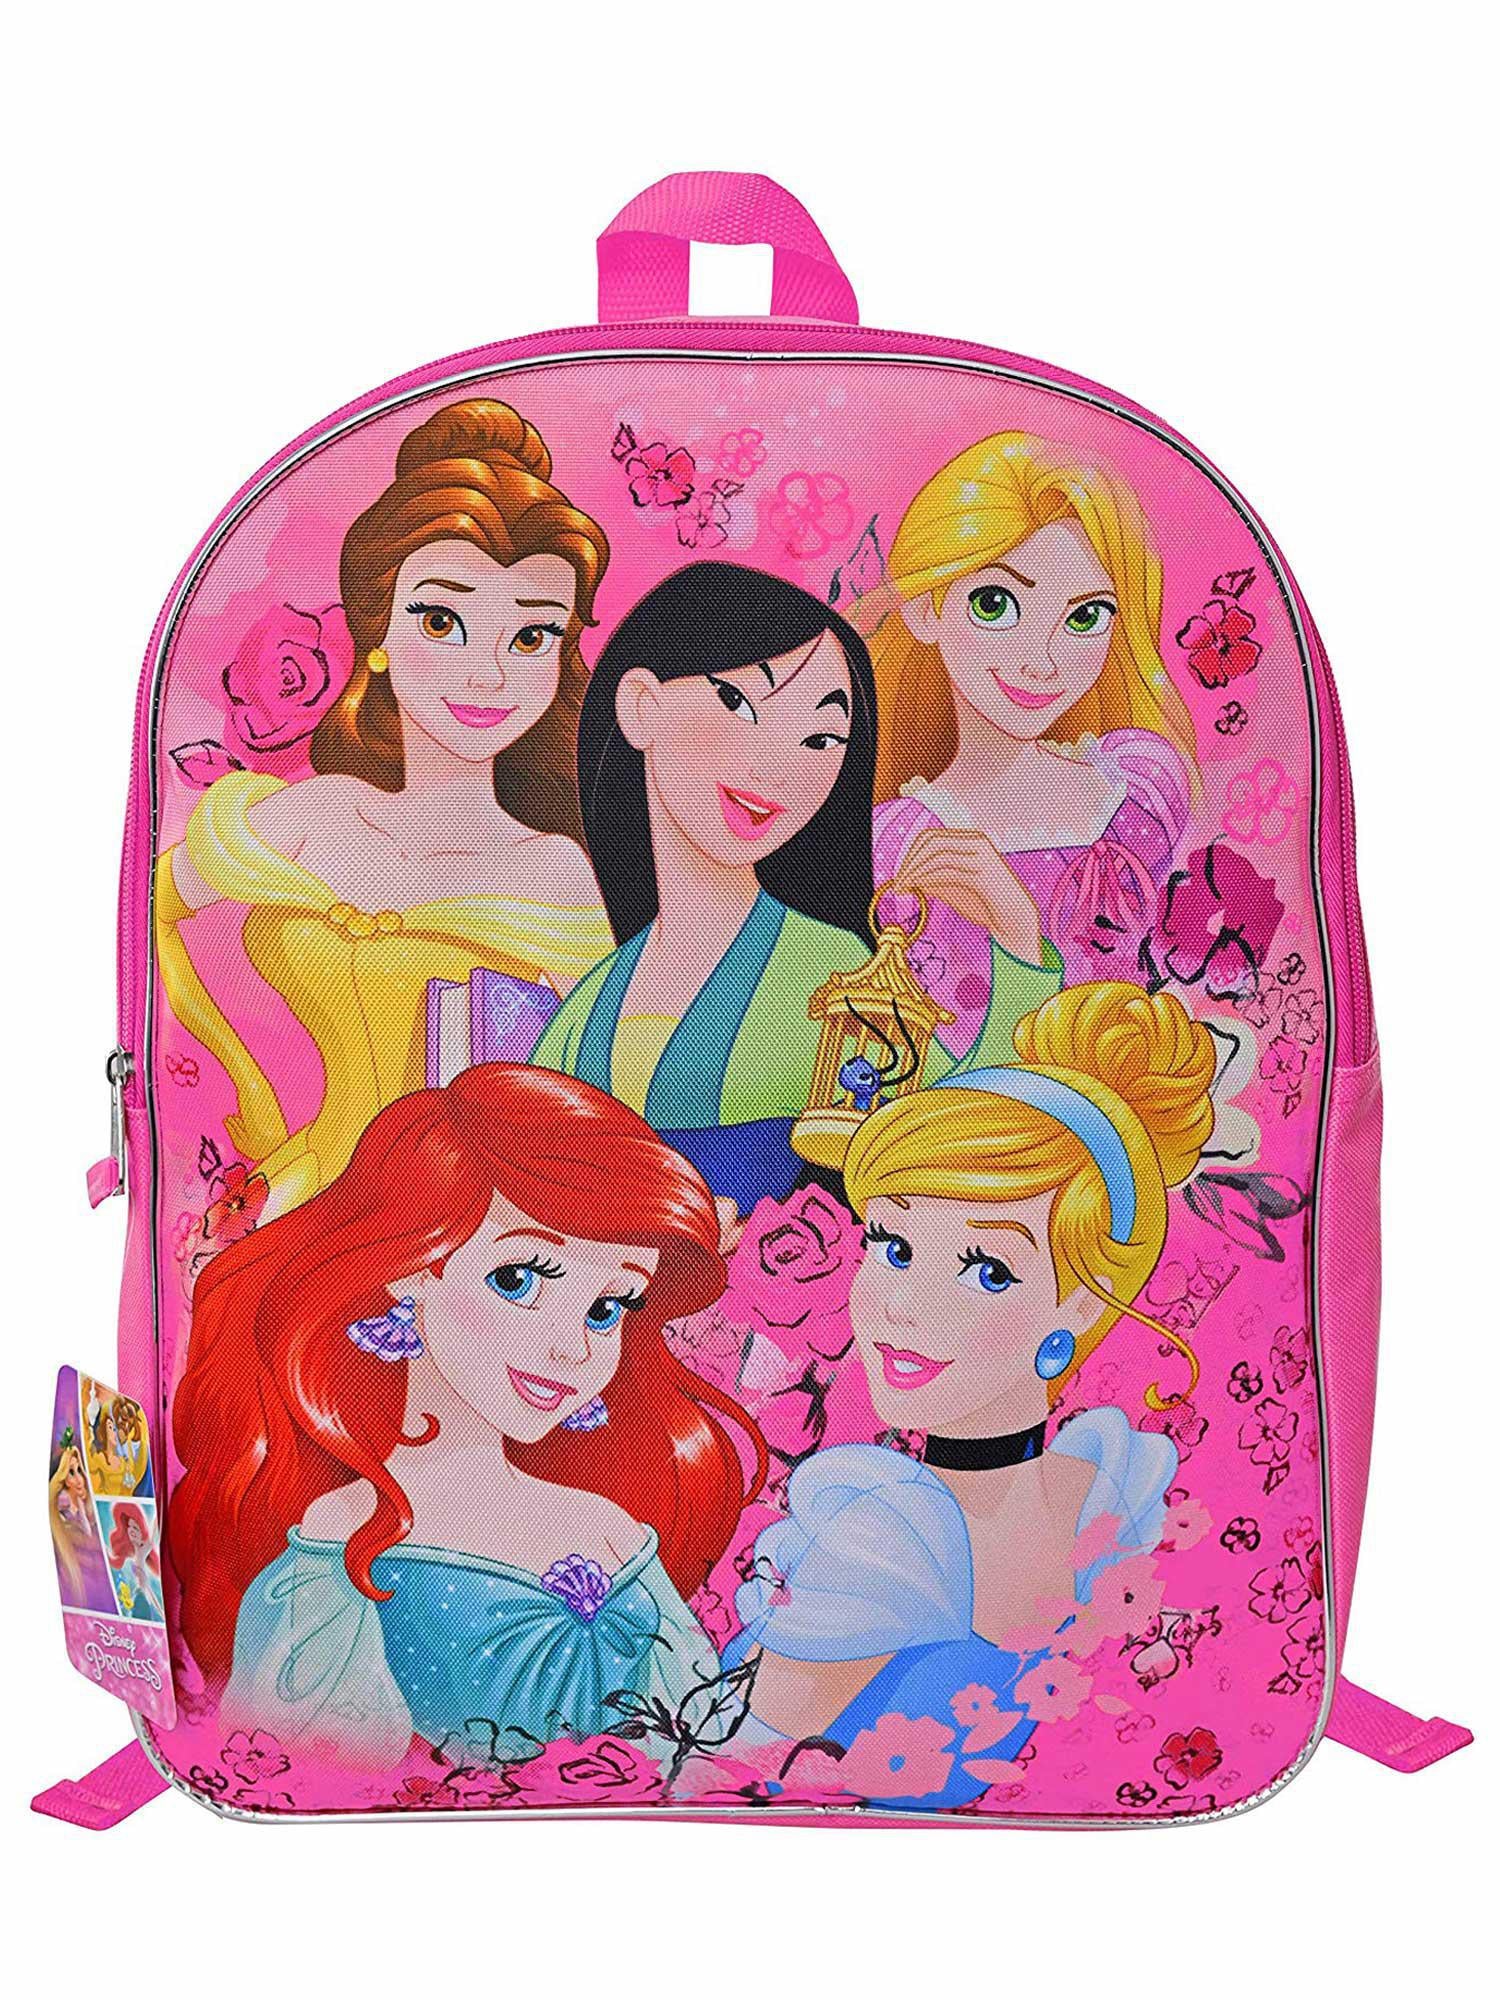 Disney Princess Insulated Lunch Bag Ariel Mulan w/ 2-Piece Snack Container Set, Women's, Size: One size, Pink